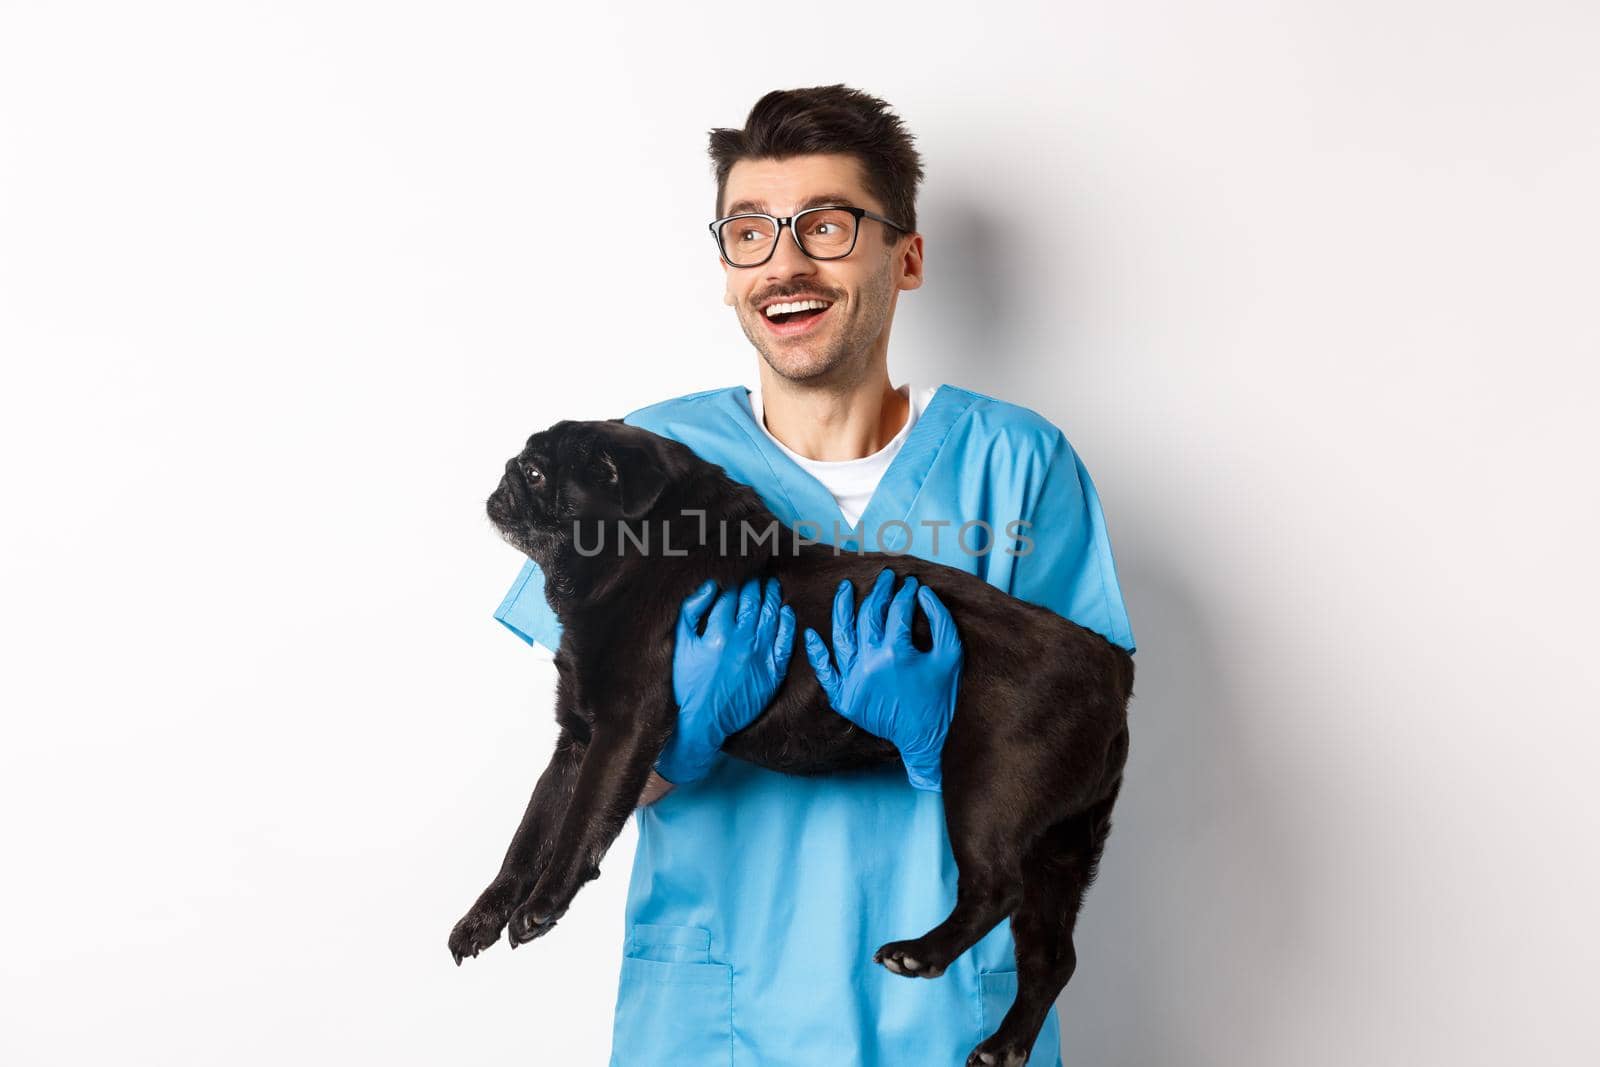 Vet clinic concept. Happy male doctor veterinarian holding cute black pug dog, smiling and looking left, standing over white background.